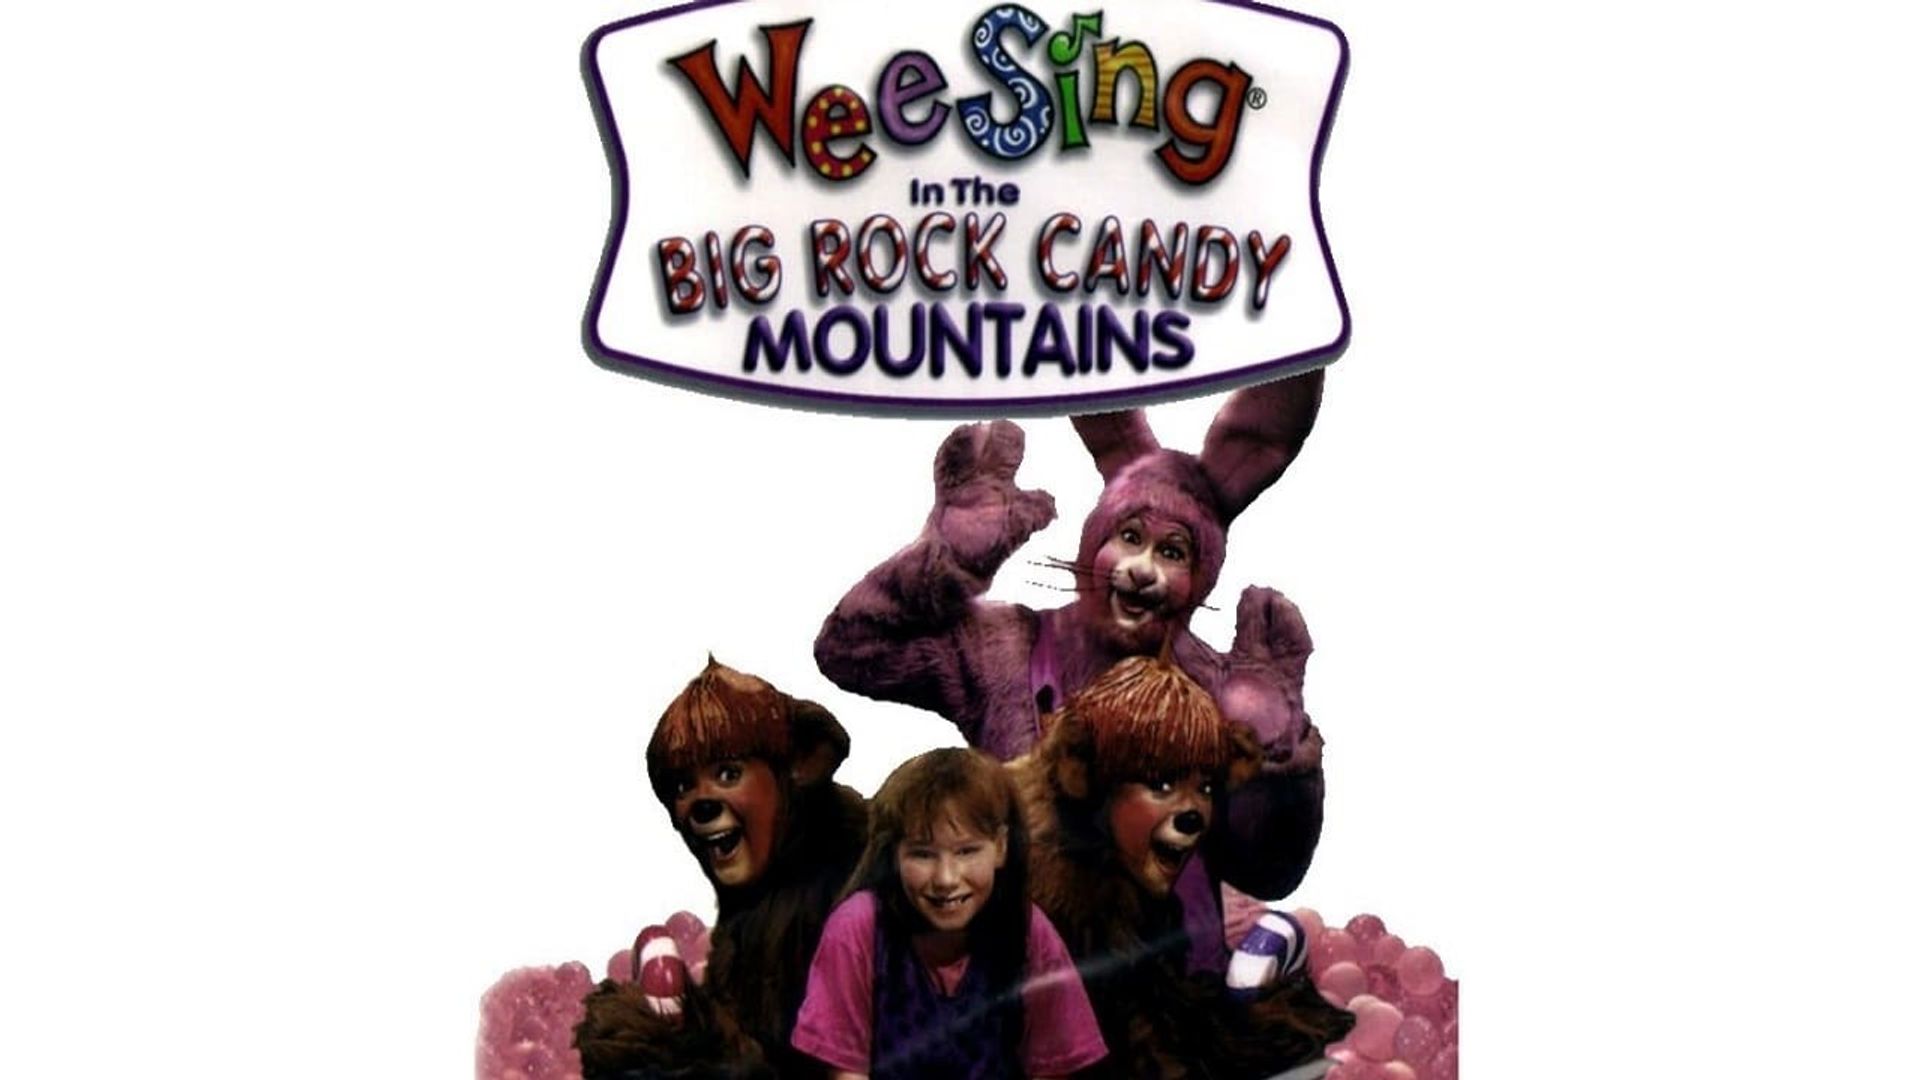 Wee Sing in the Big Rock Candy Mountains background